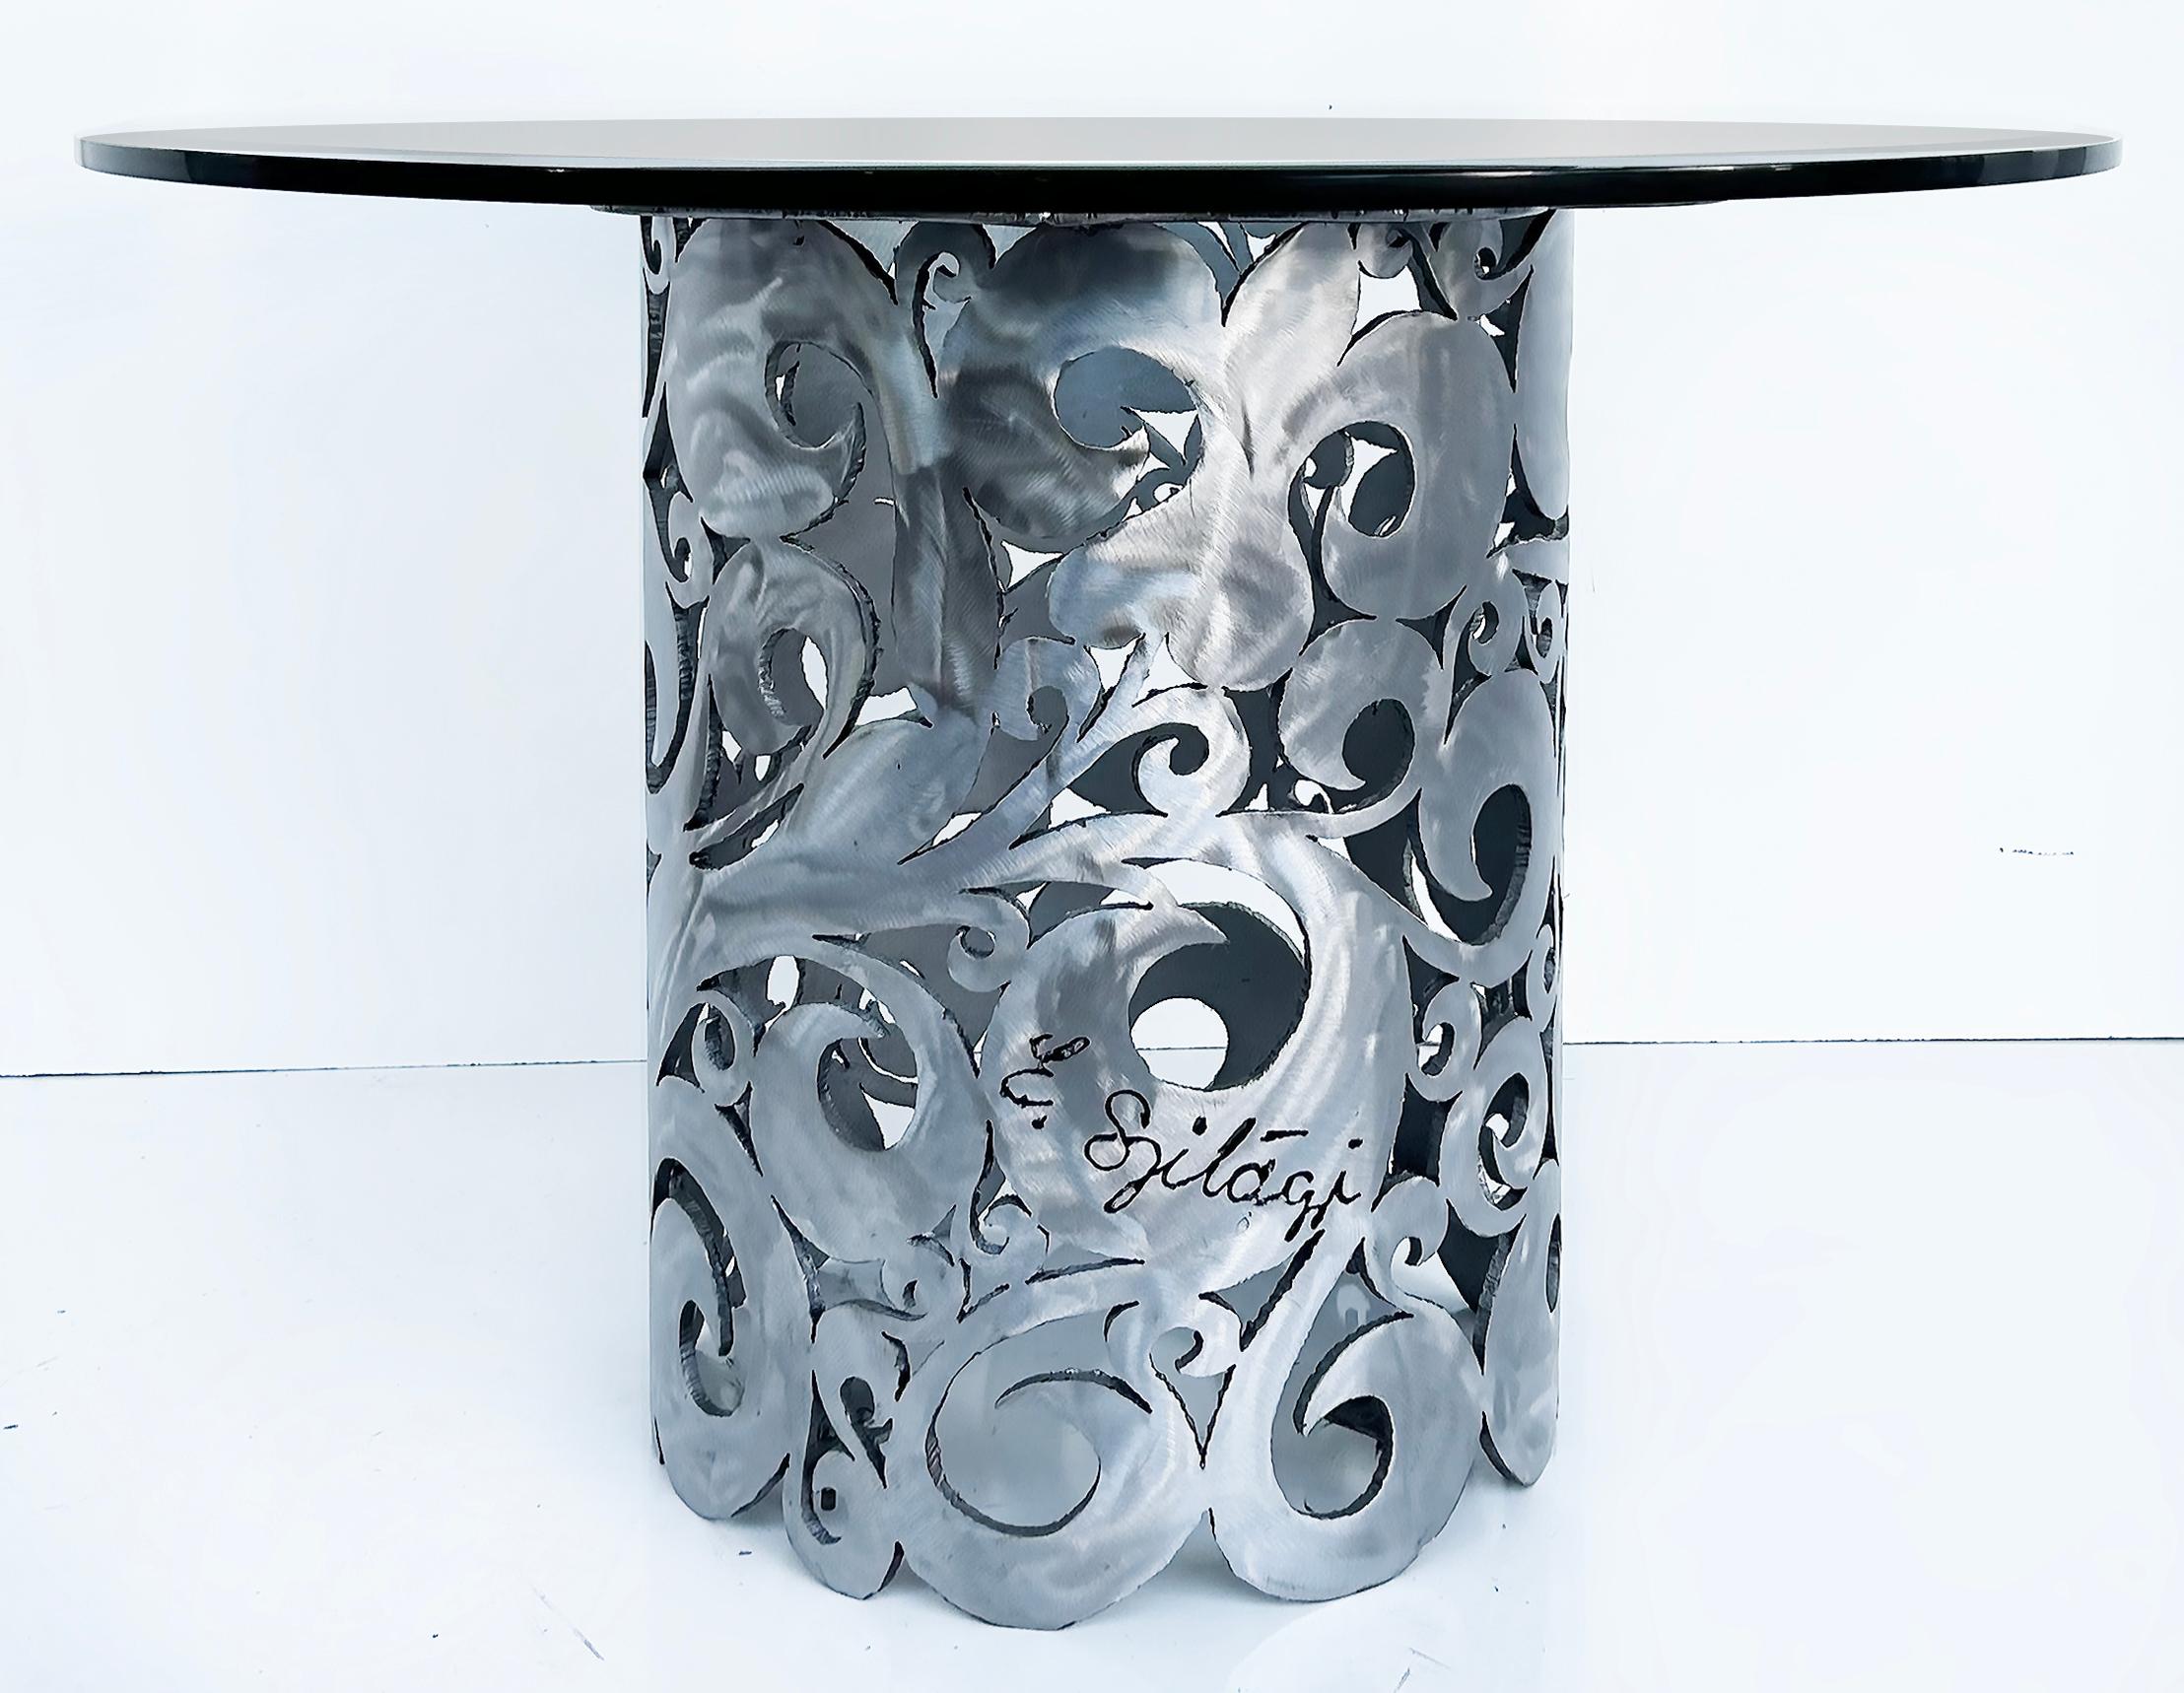 Vintage Torch Cut Brutalist Steel Table, Scrolling Floral Design, Artist signed 

Offered for sale is a vintage torch-cut brutalist steel center or dining table with a scrolling floral cut-out design. The table is topped with a thick beveled glass